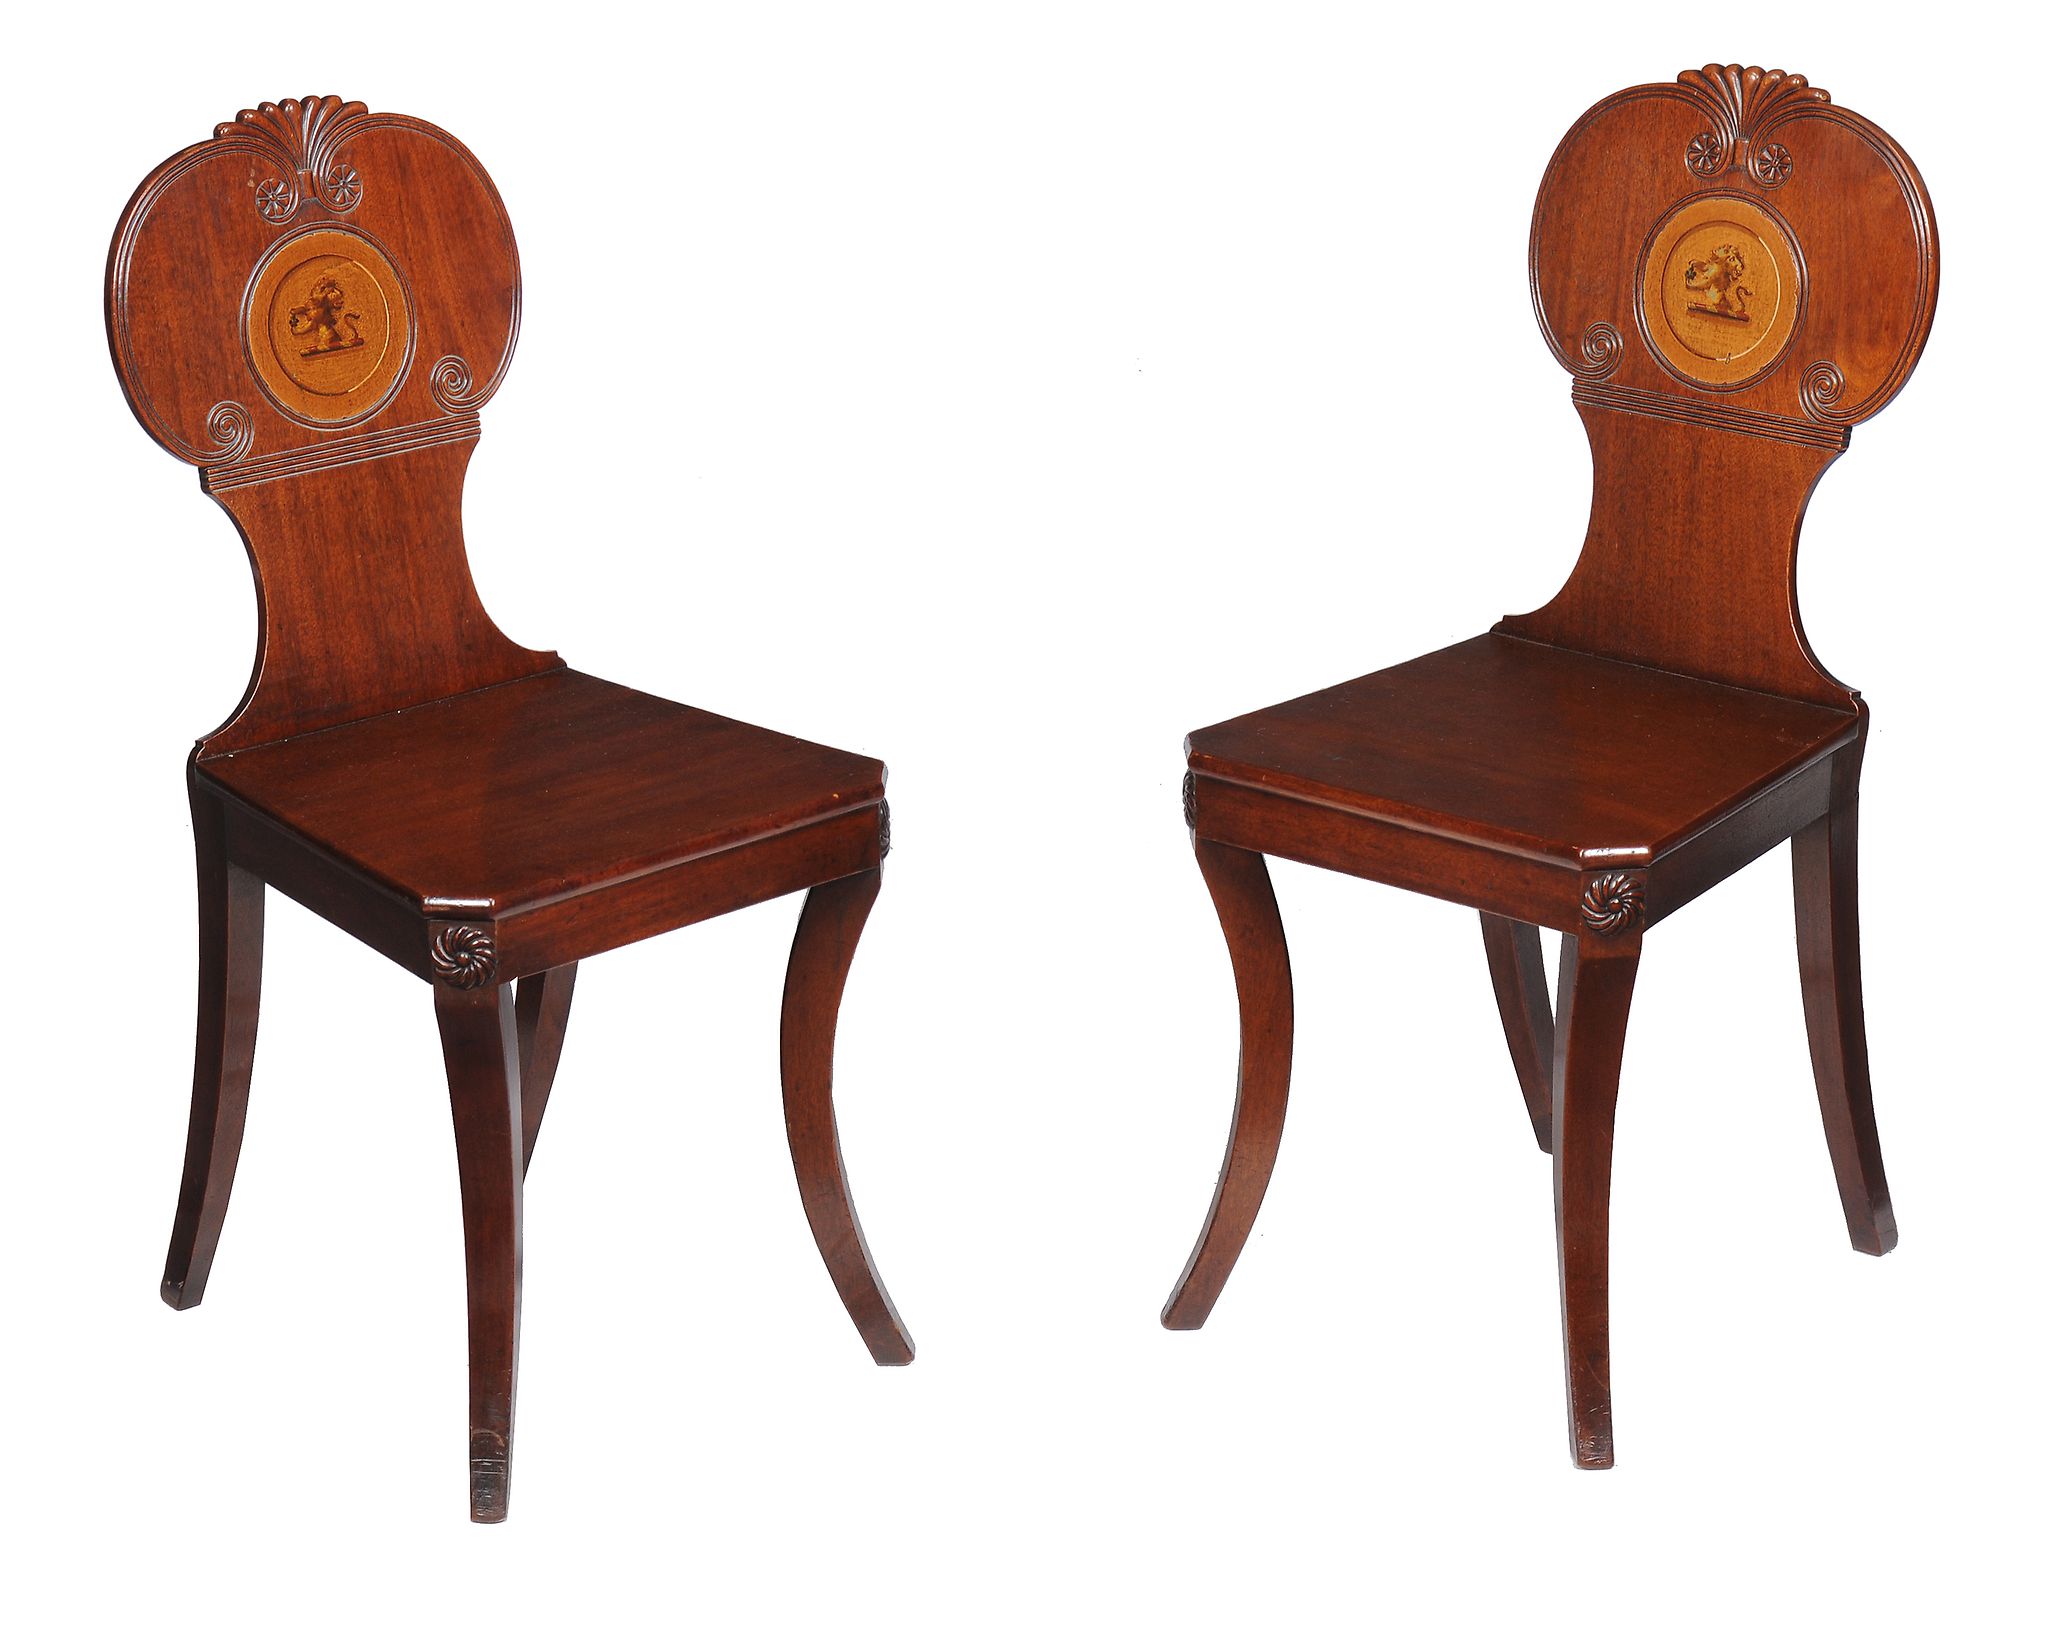 A pair of Regency mahogany hall chairs , circa 1815, each with shaped lobed and scrolled back with